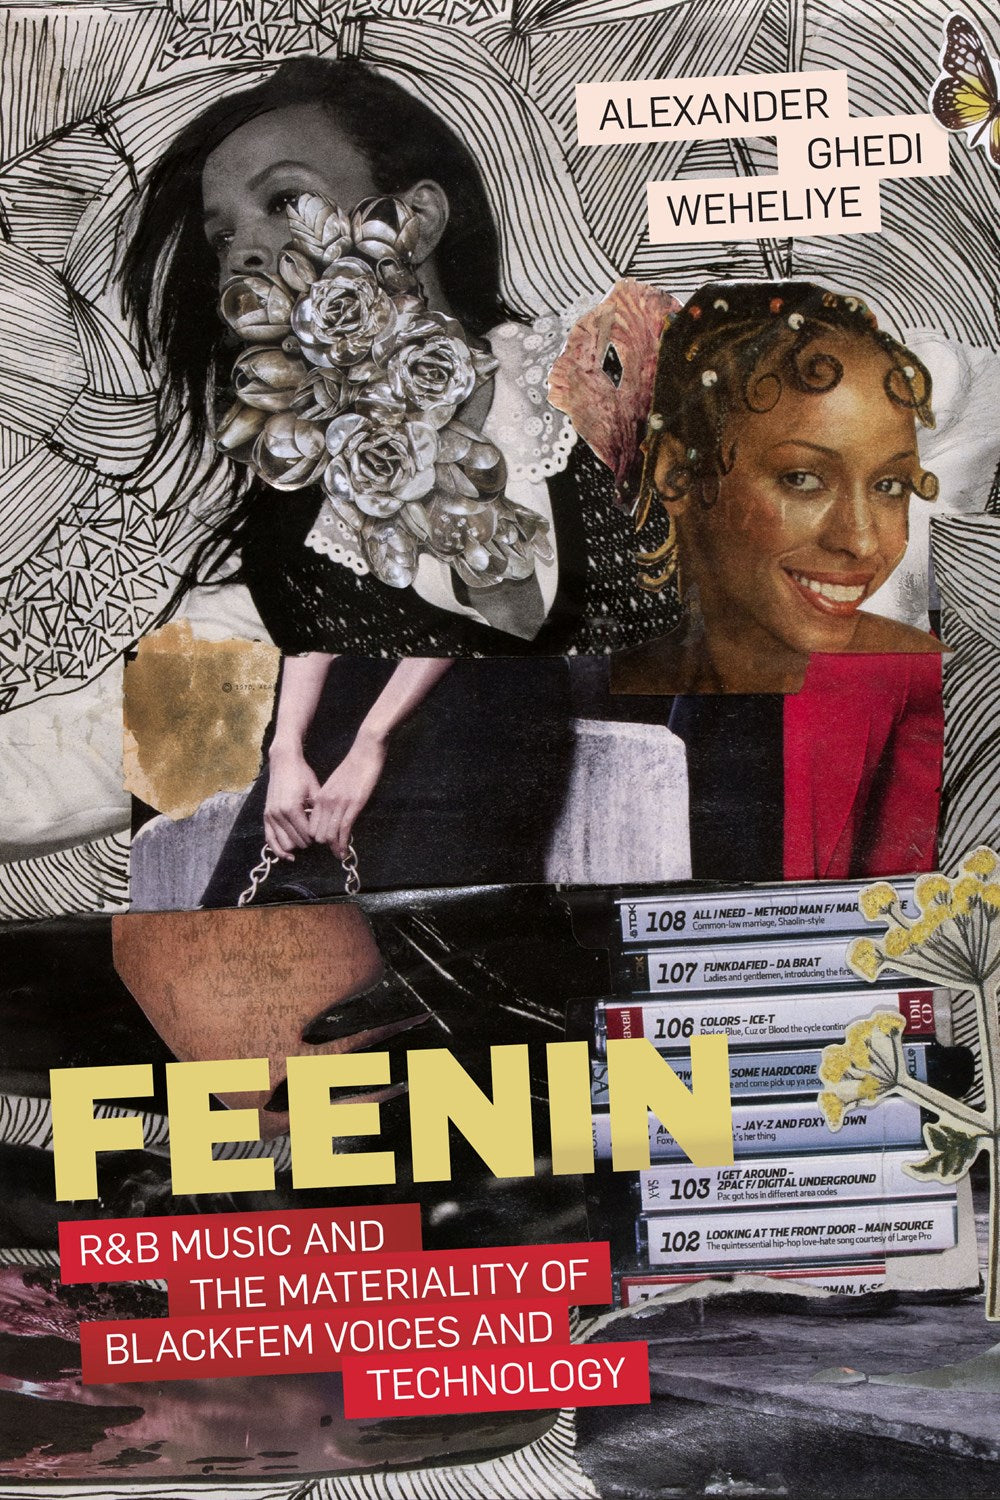 PRE-ORDER: Feenin: R&B Music and the Materiality of BlackFem Voices and Technology